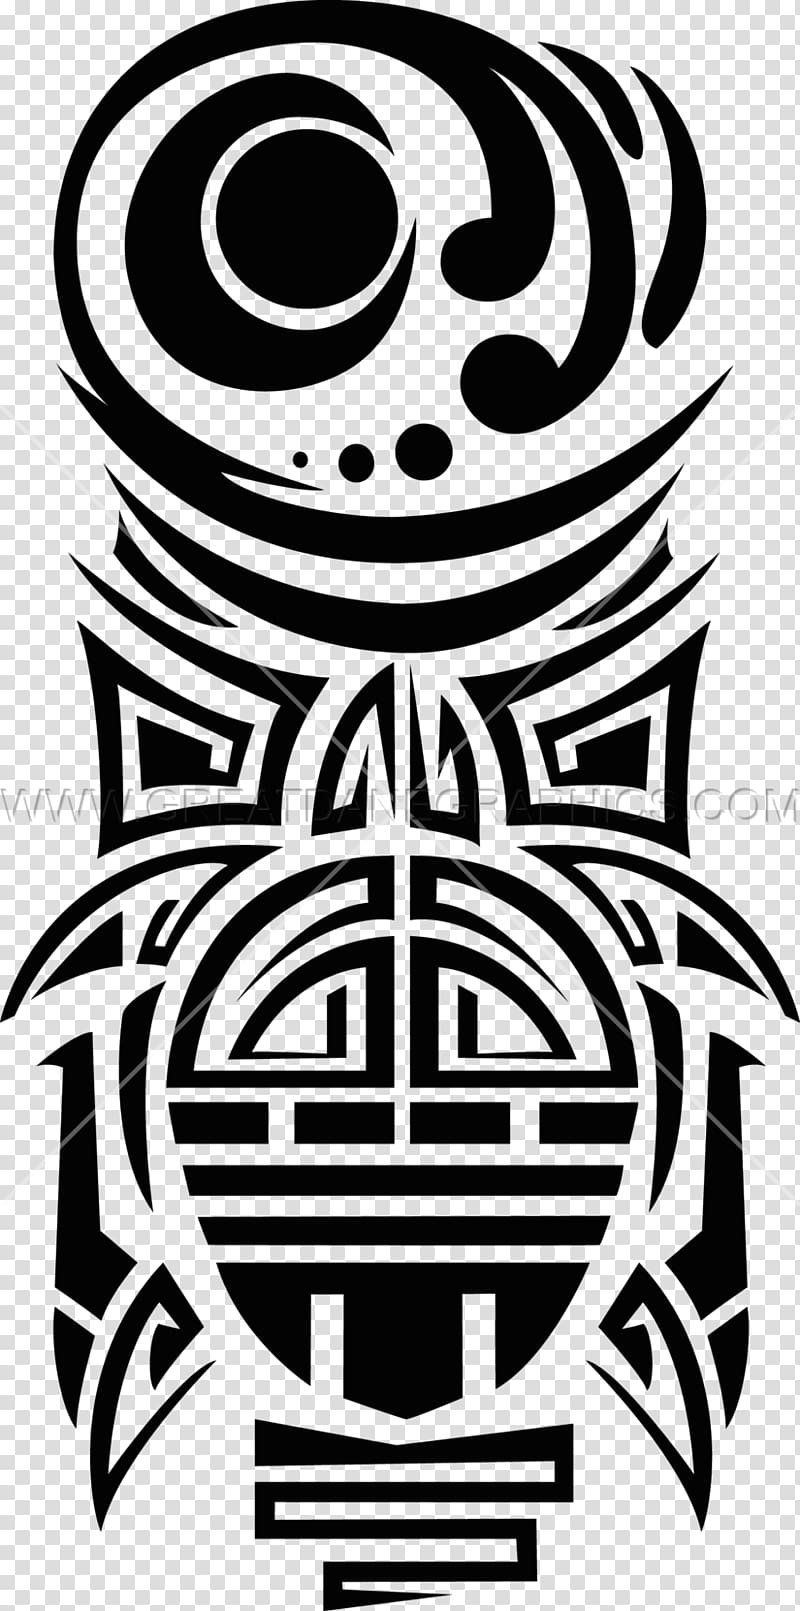 Totem Pole Tattoos Designs Ideas and Meaning  Tattoos For You